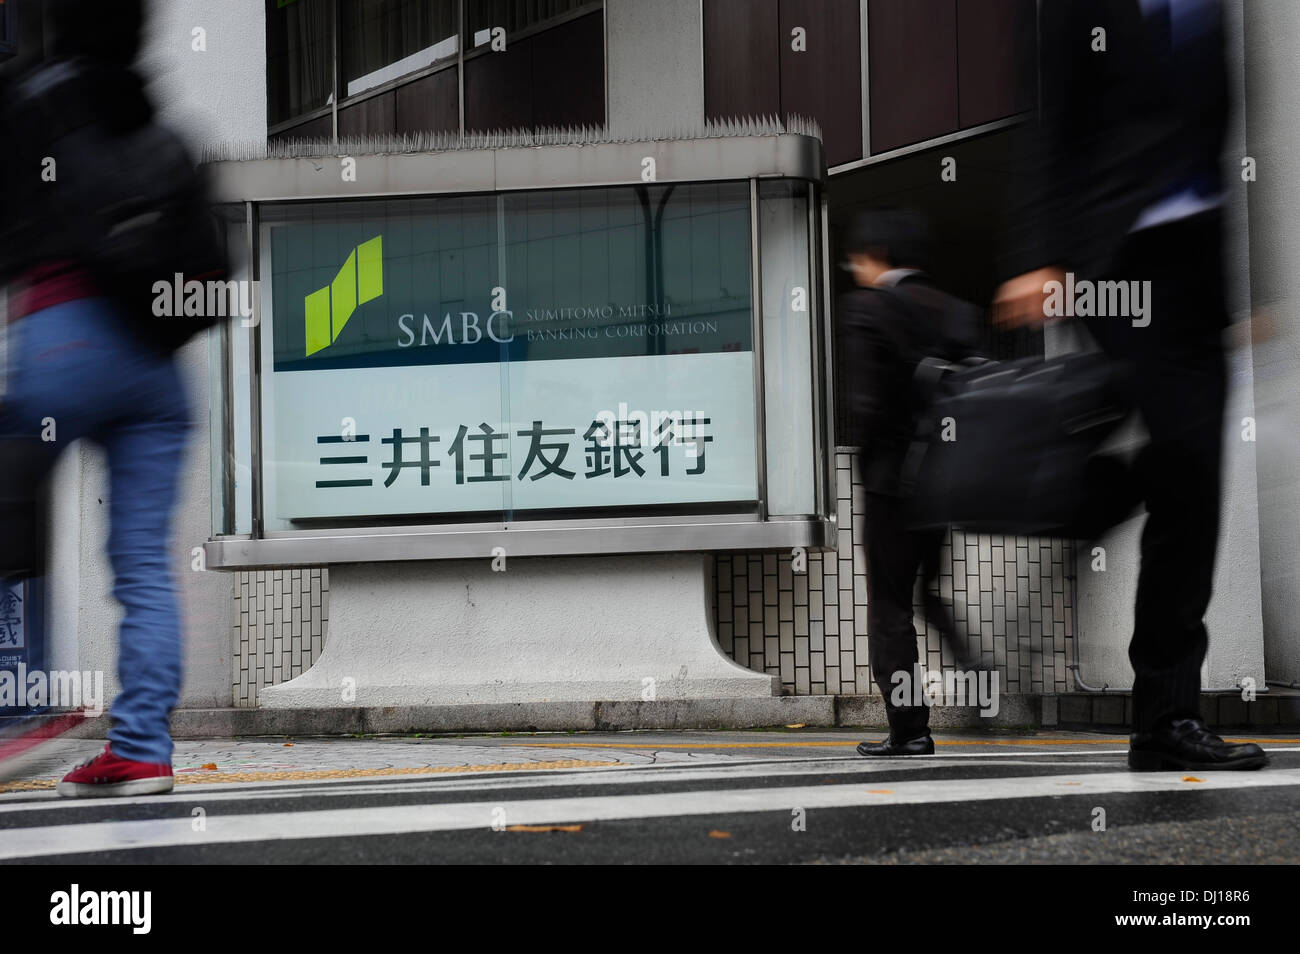 November 15th, 2013 : Tokyo, Japan - People walked by Sumitomo Mitsui Banking Corporation, or SMBC, which currently revealed that it had transaction with anti-social groups, at Shinjuku, Tokyo, Japan on November 15, 2013. After Mizuho Bank, Ltd., one of Japanese megabanks, revealed its transaction with such groups, SMBC and Bank of the Tokyo-Mitsubishi UFJ also revealed such transactions. © Koichiro Suzuki/AFLO/Alamy Live News Stock Photo